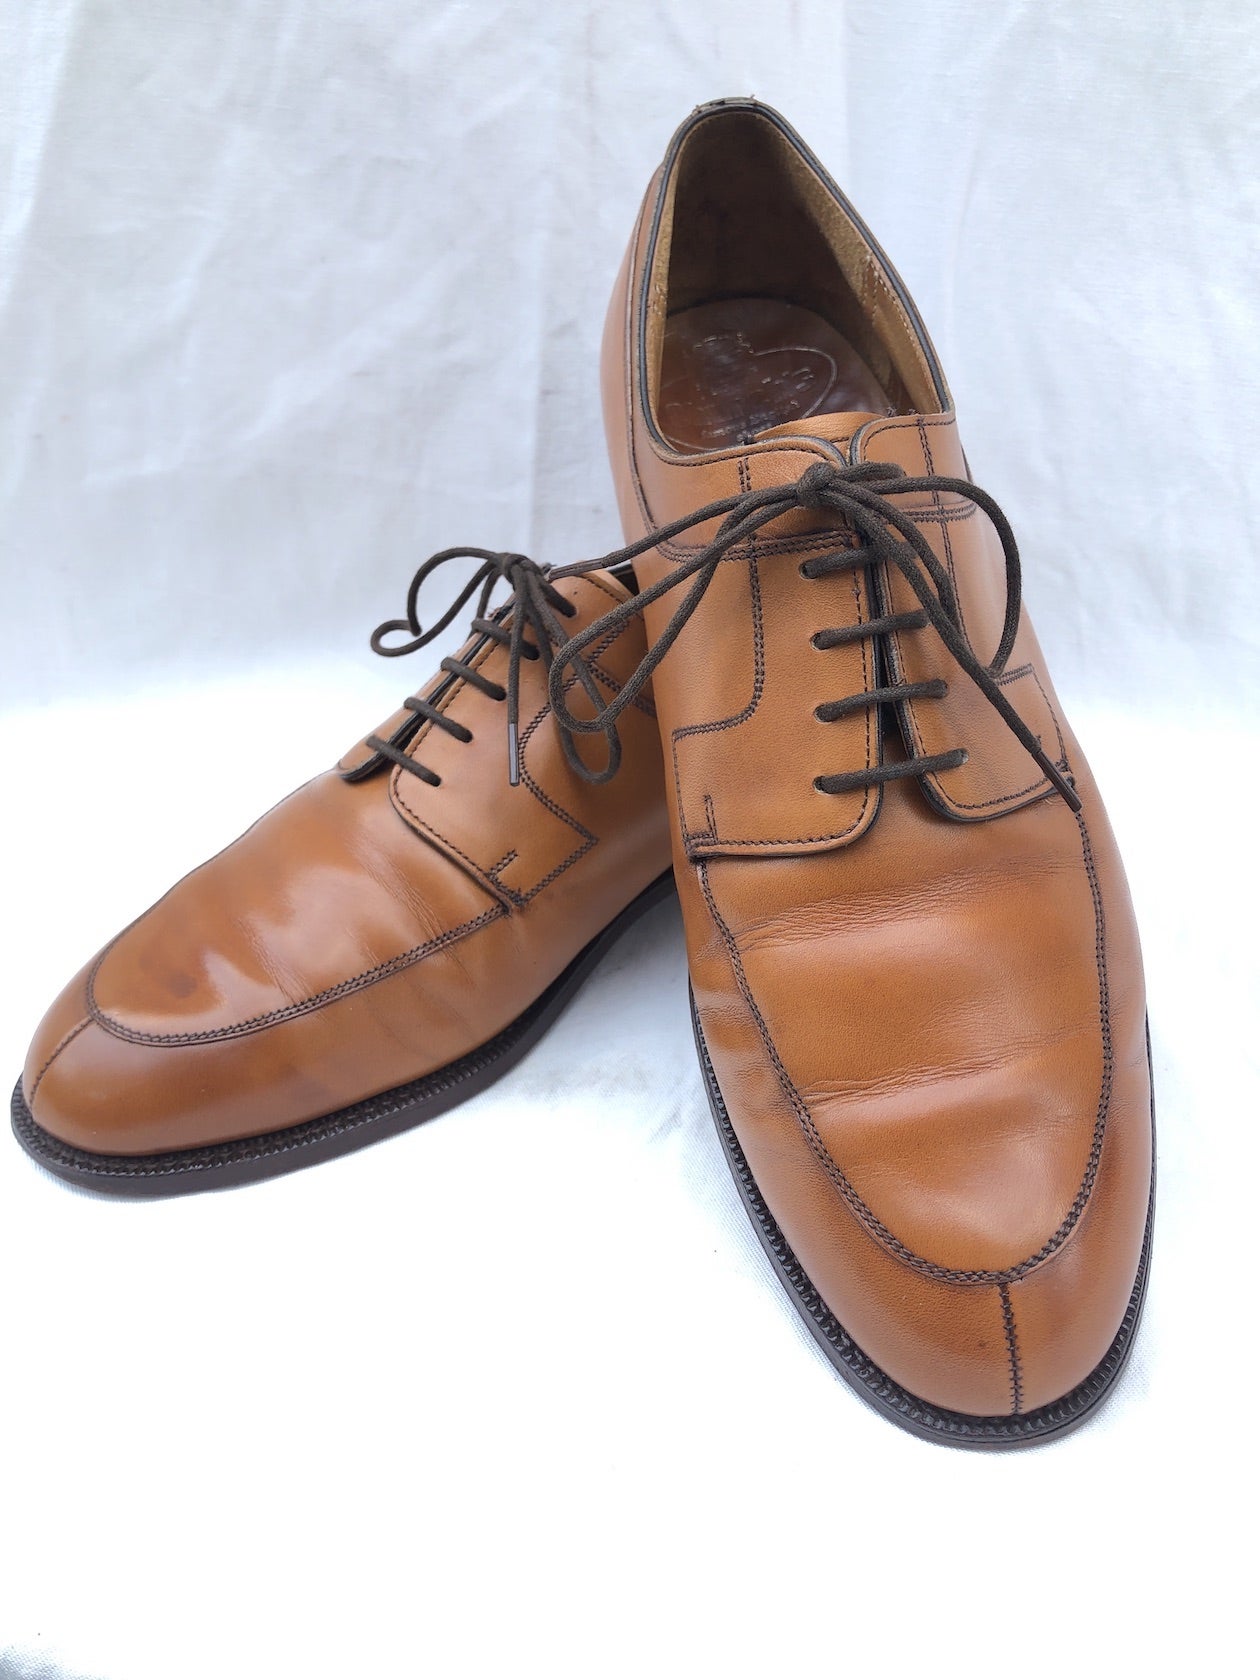 Vintage Church's Leather Shoes Made in England | ILLMINATE blog